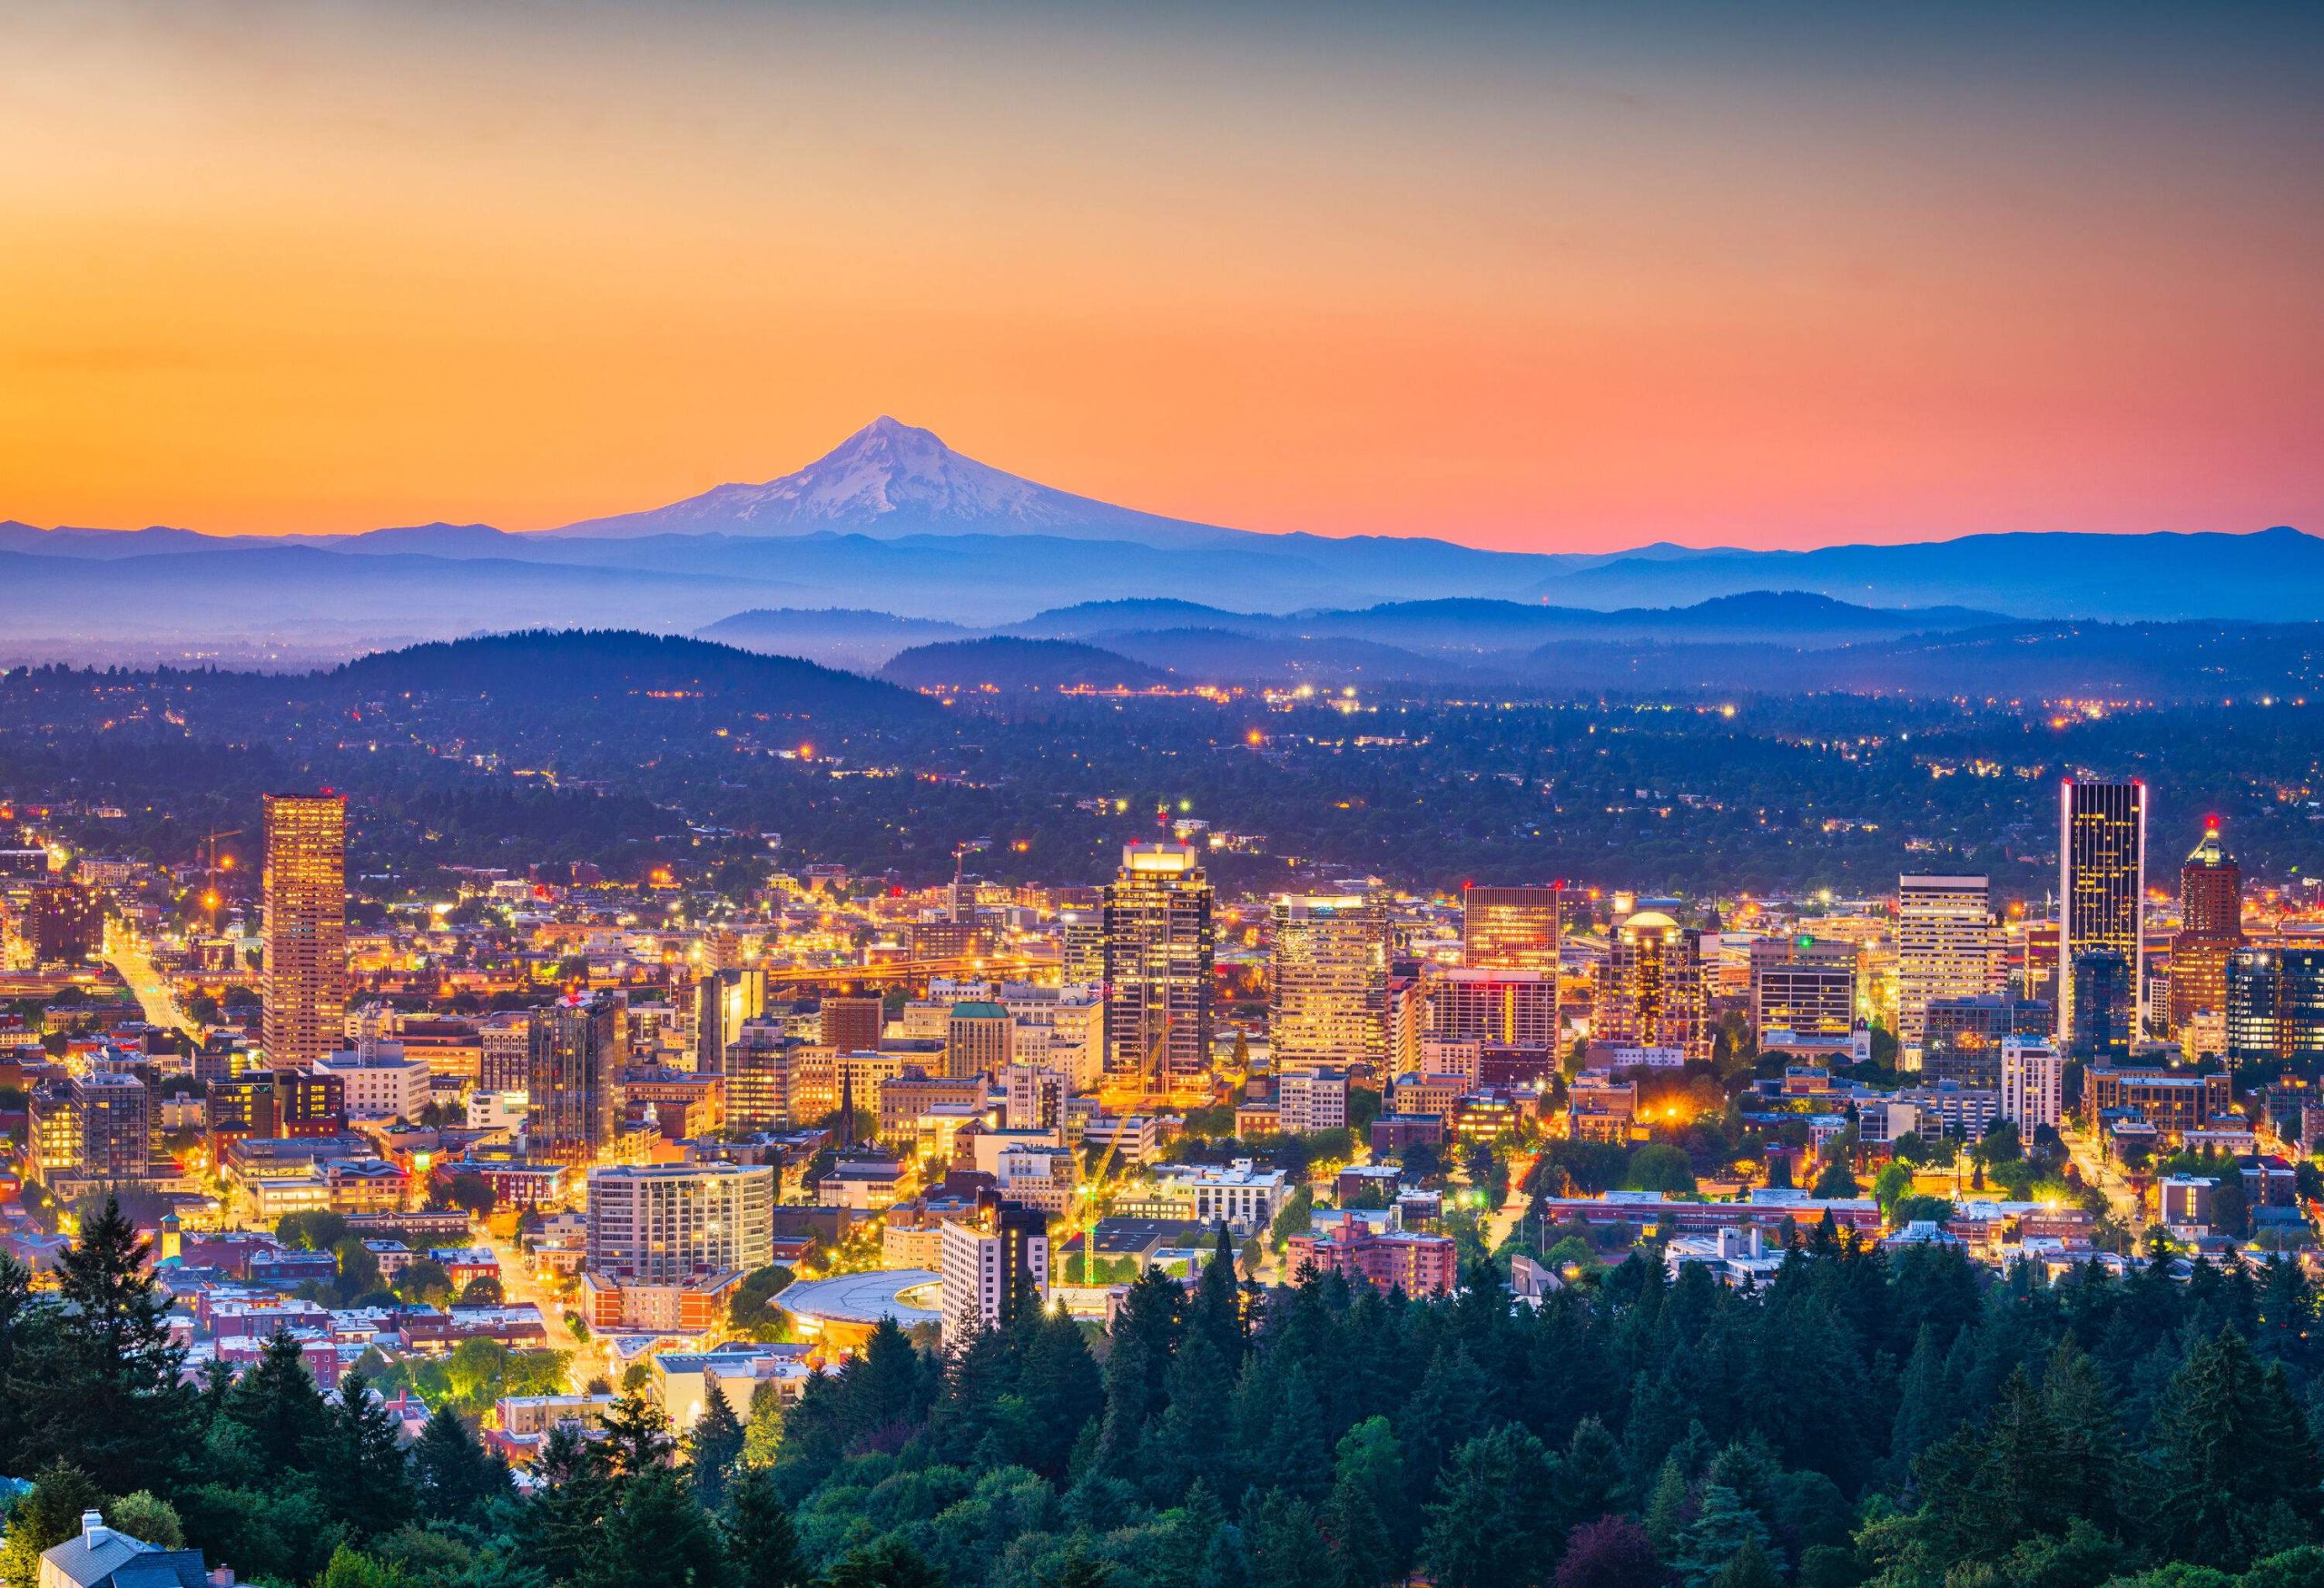 A dazzling cityscape and misty forested mountains under the orange skies.